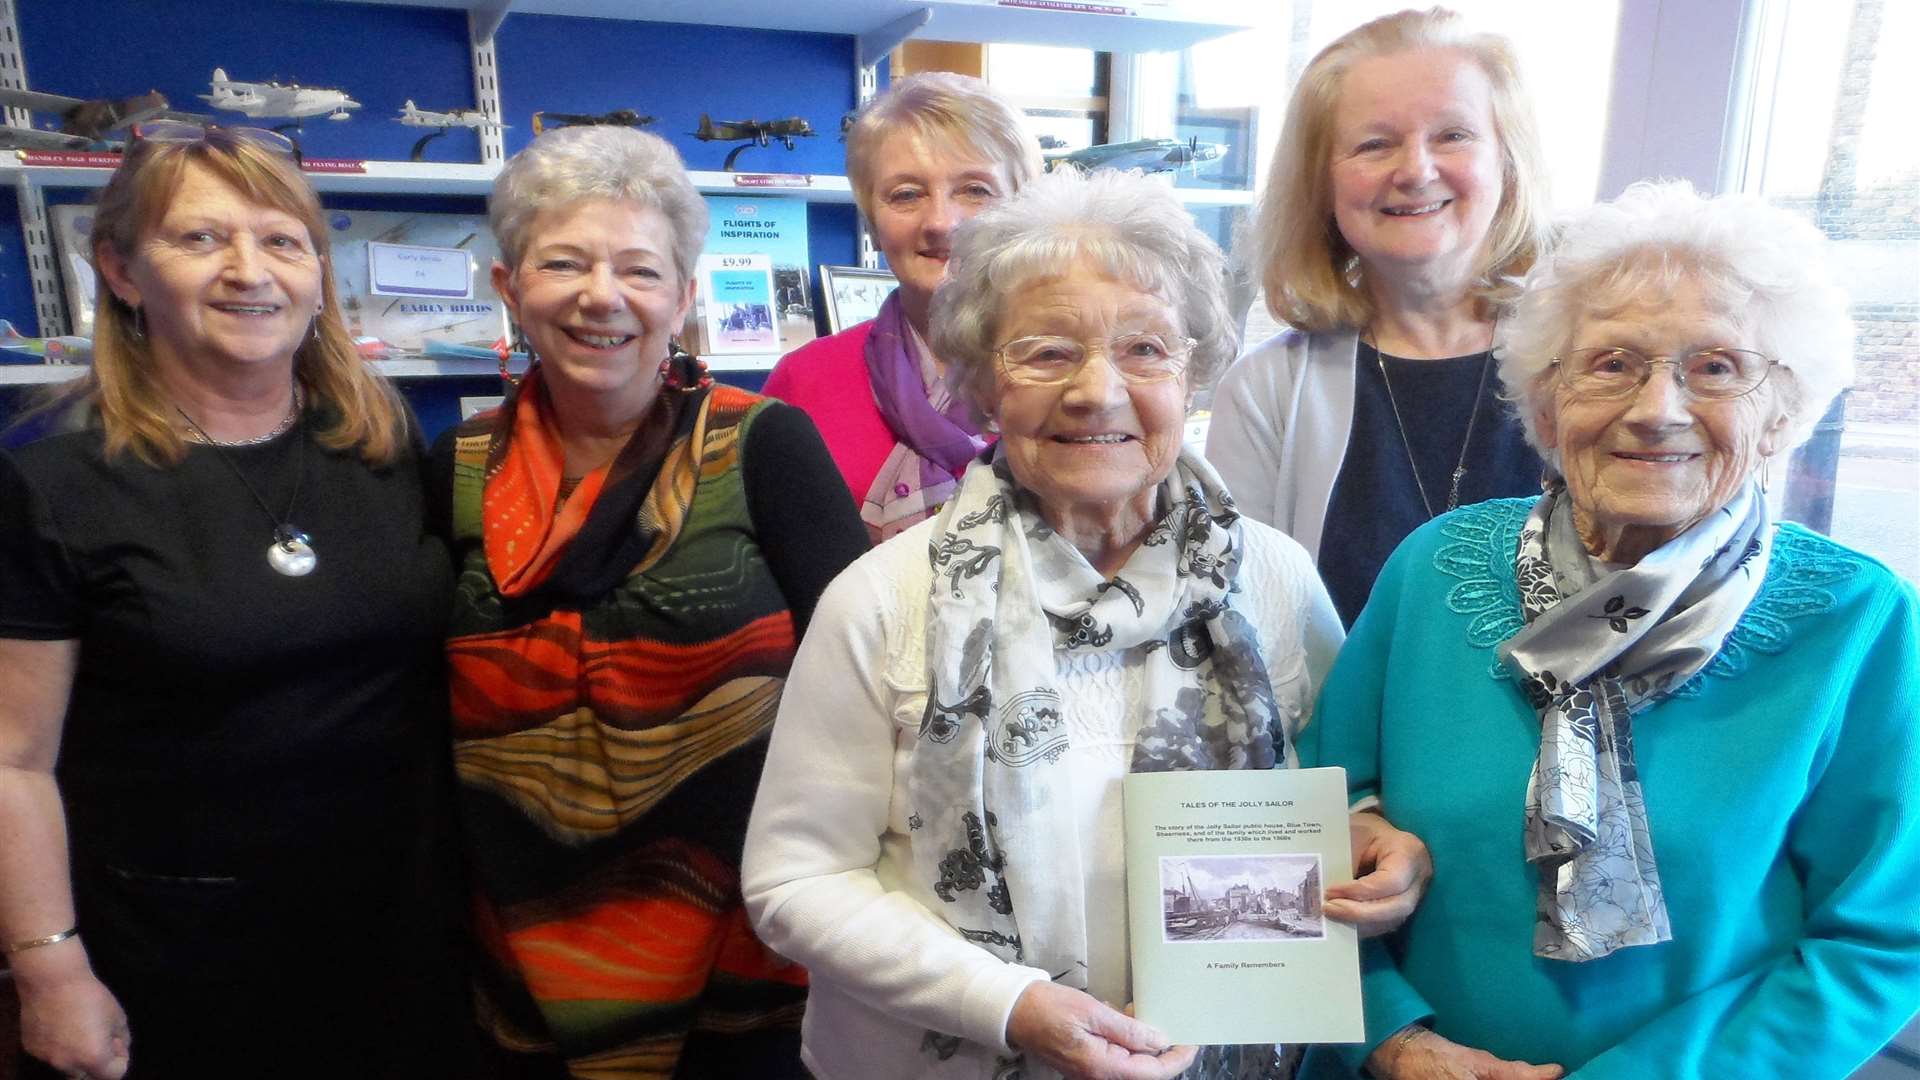 Left to right: Bridget Cavilla, Val Wakeling, Pam Blackmore, Lilian Heath, Vivien Bailey and Carrie Stearns at Blue Town Heritage Centre